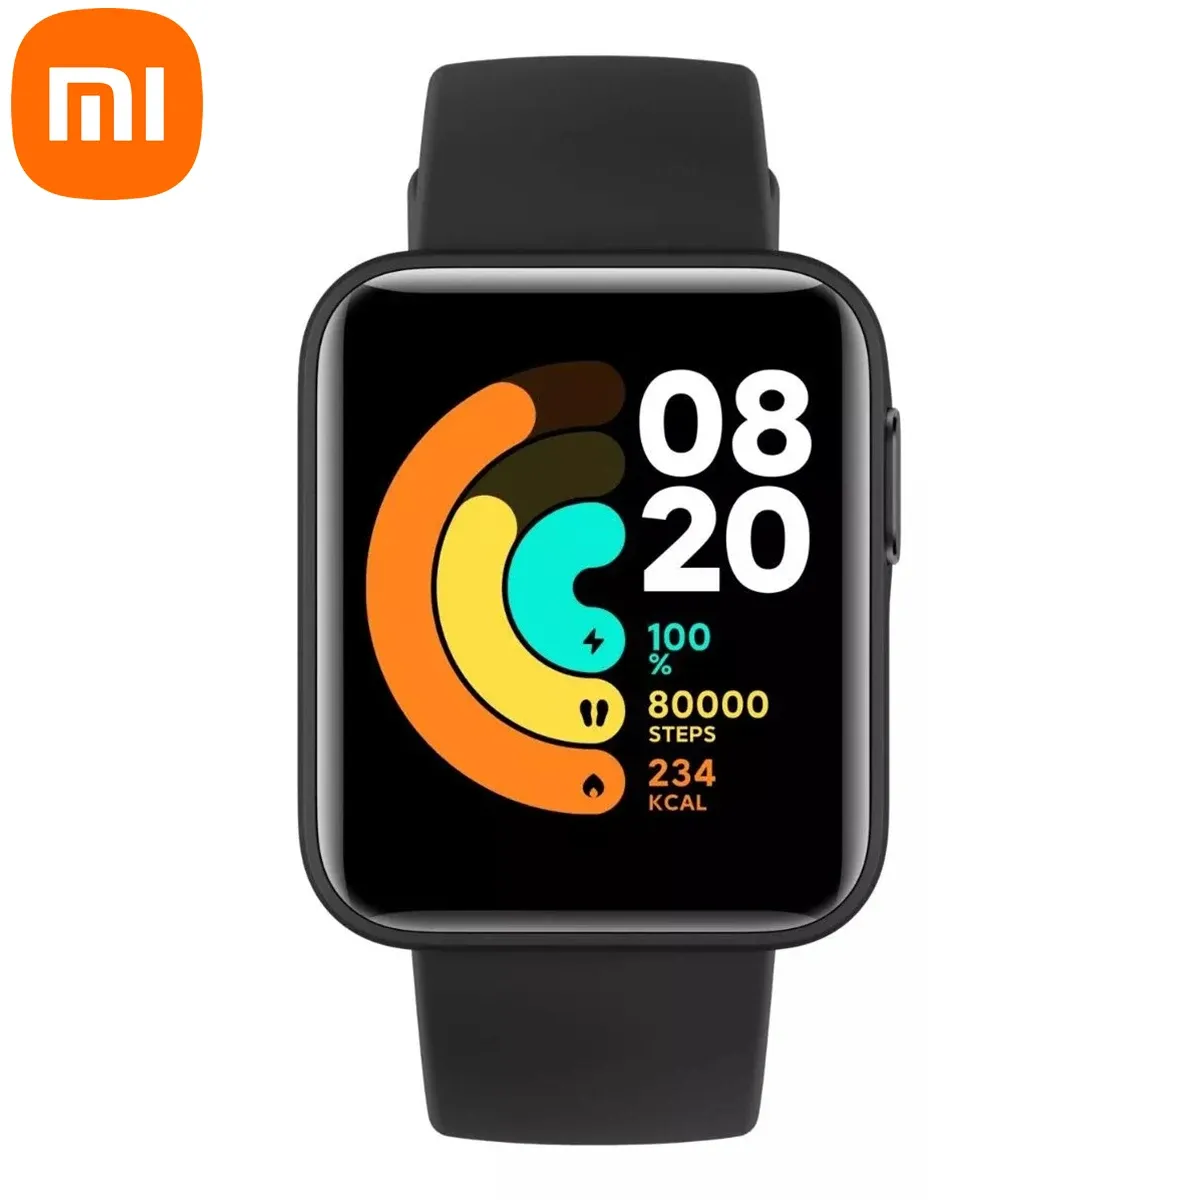 Watches Original Xiaomi Mi Smart Watch Lite 1.4 Inch Touch Screen, 5ATM Water Resistant, GPS, Steps, Sleep and Heart Rate Monitor, Fit